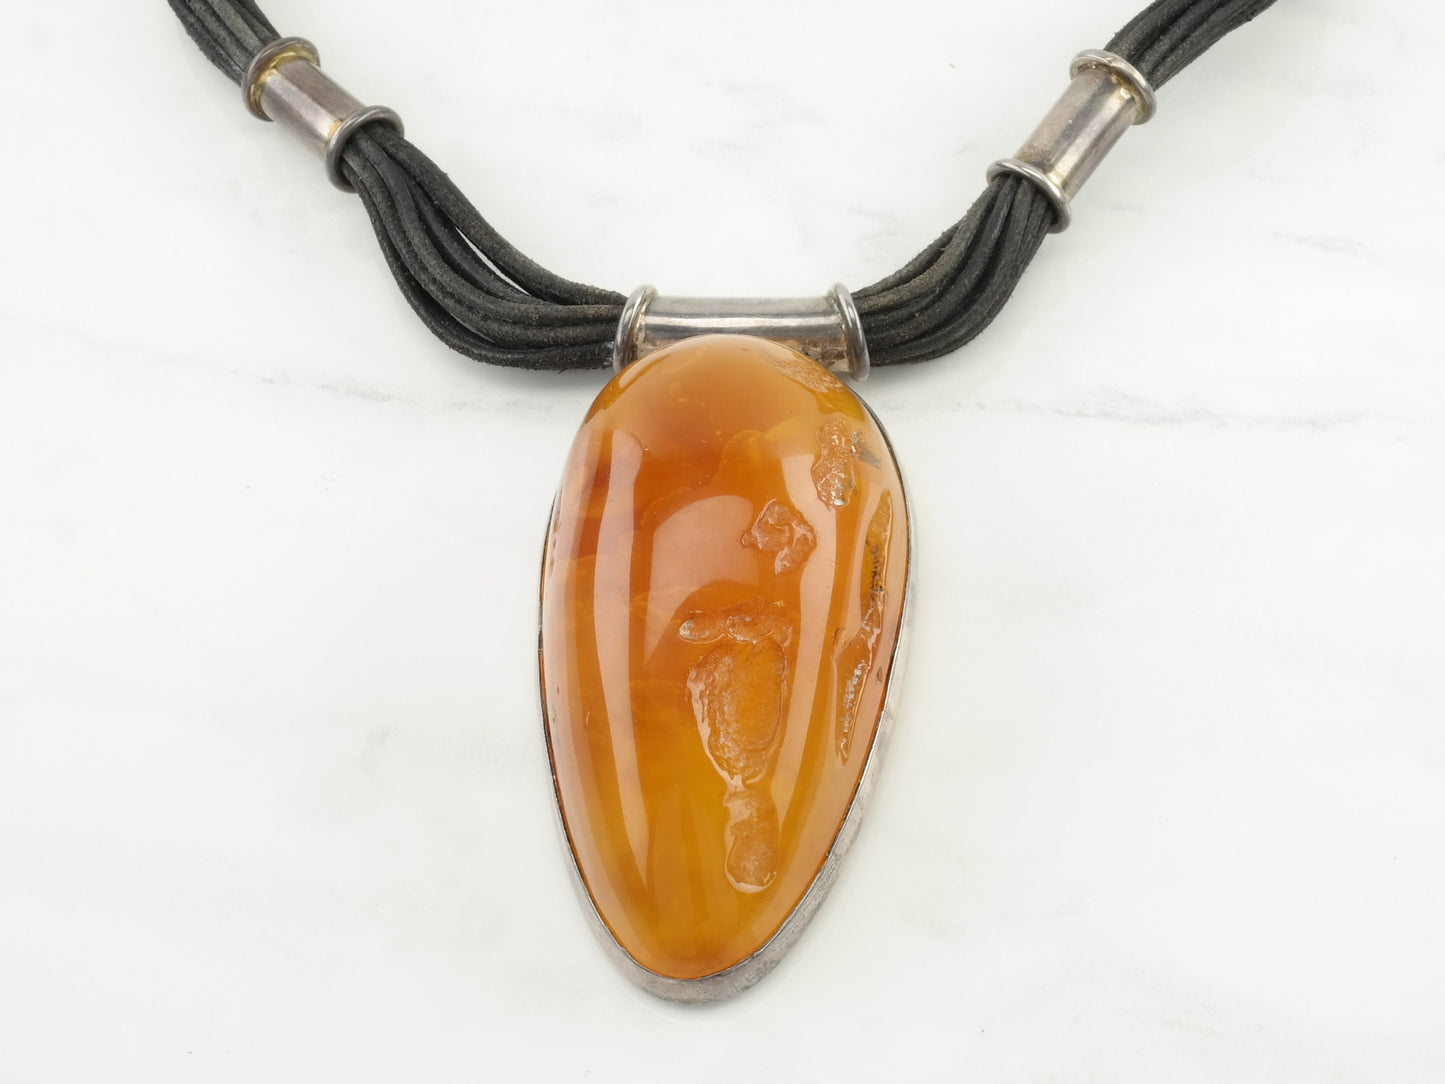 Vintage Enormous Natural Baltic Amber Pendant Duo Tone Leather Cord Sterling Silver Necklace